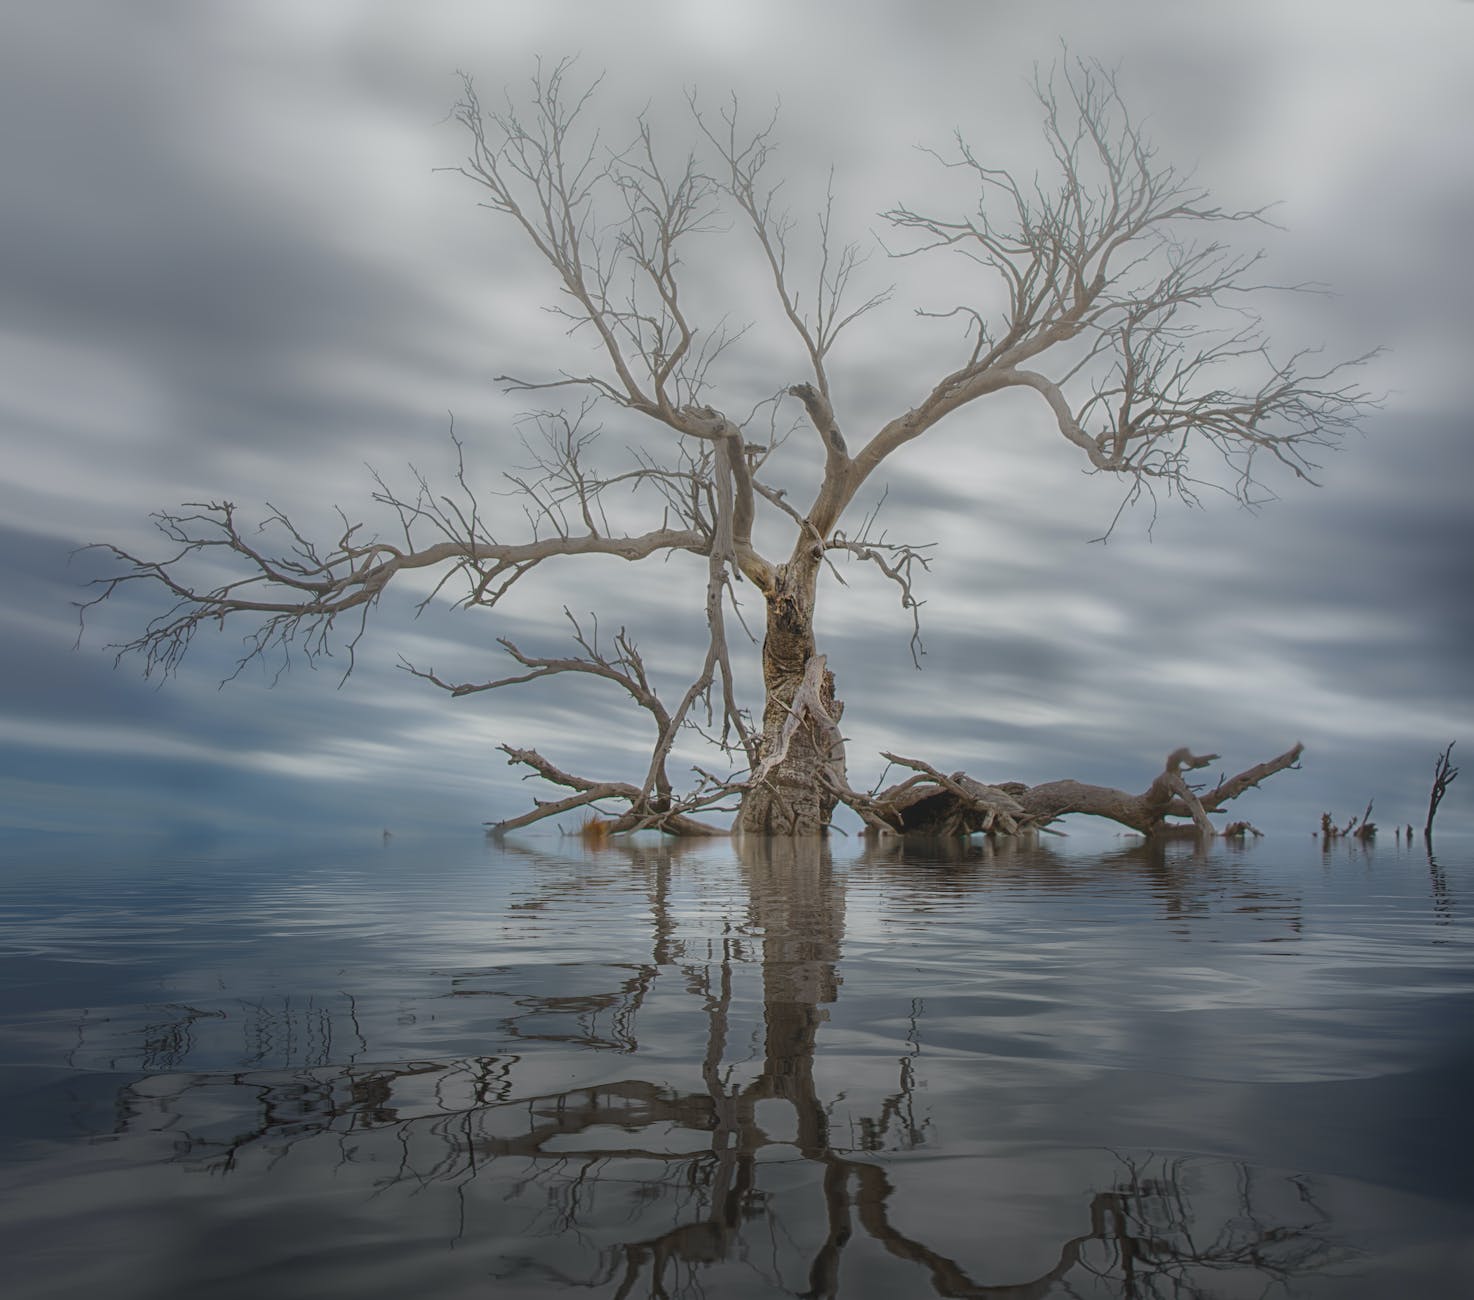 Leafless tree in water. A flood is an event that can cause trauma.